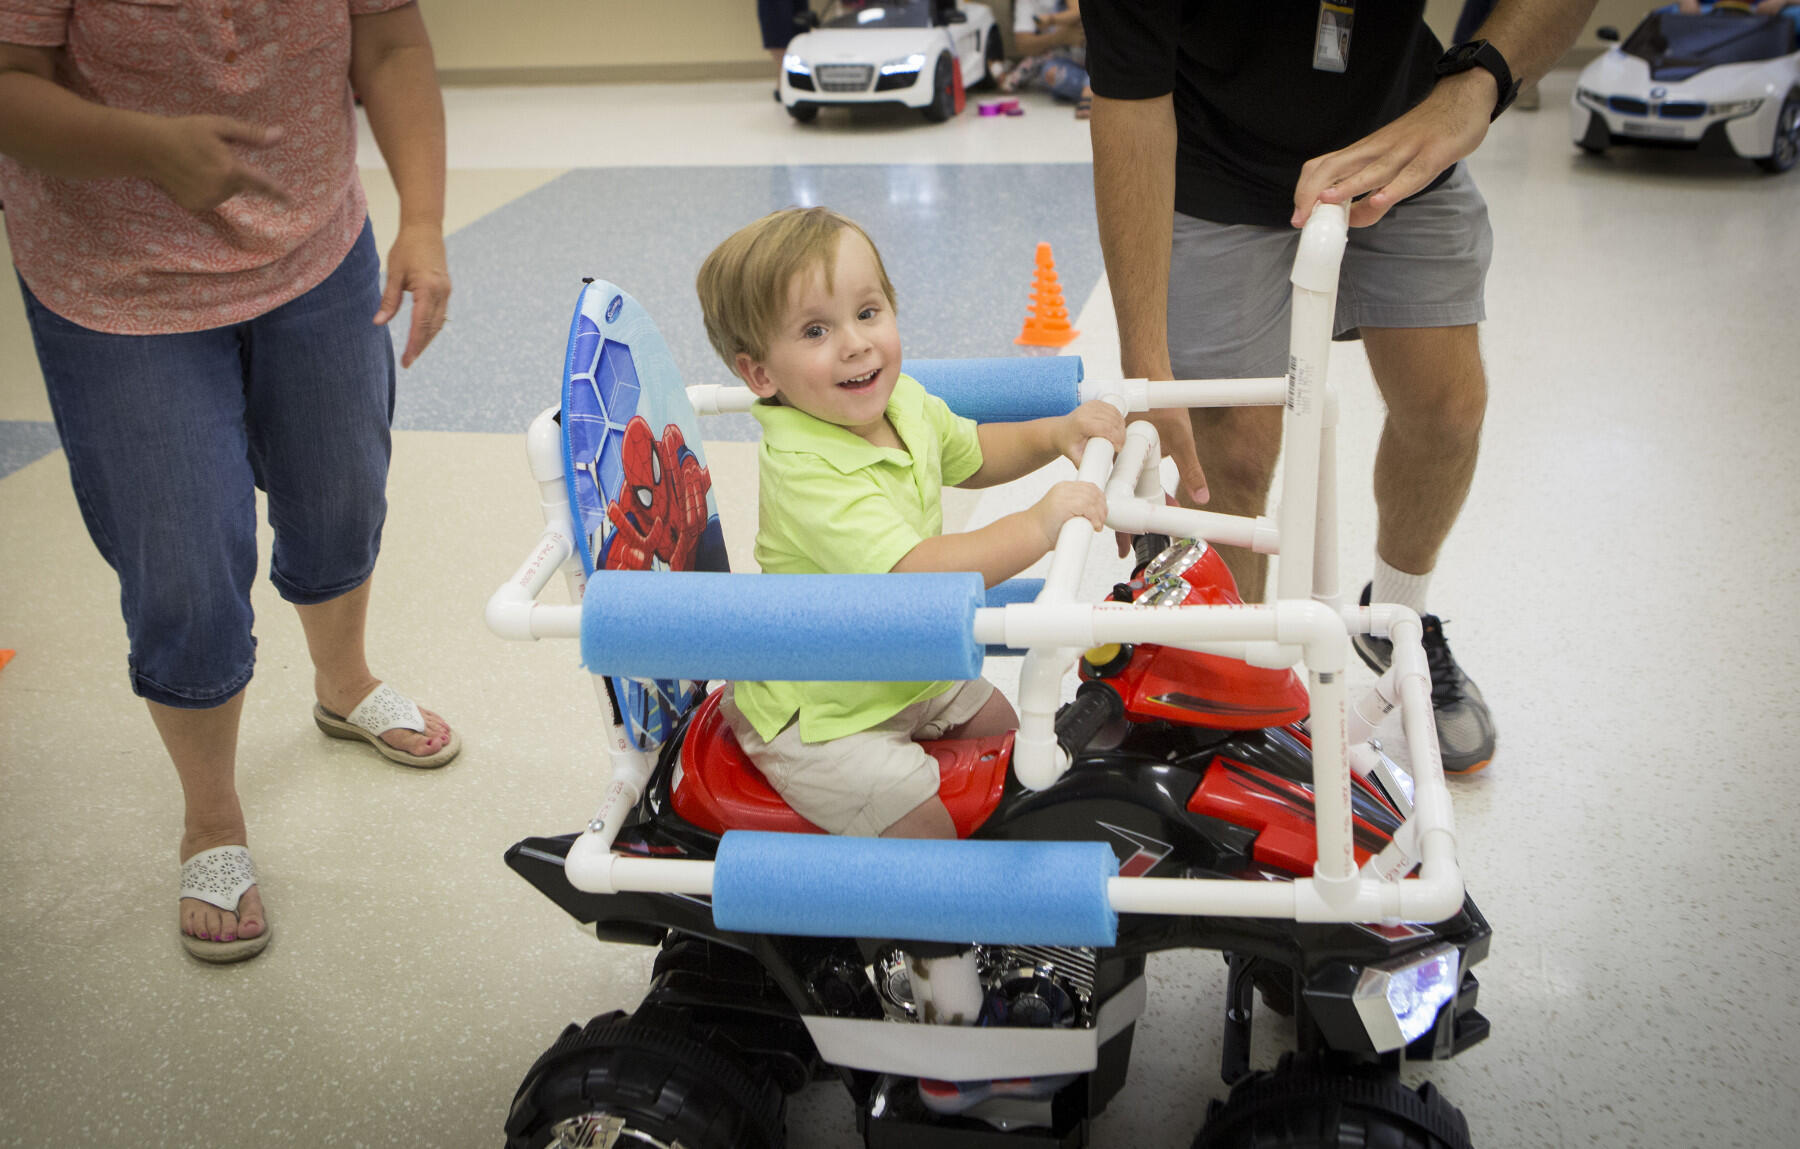 Supported by an MCV Hospitals Auxiliary grant, the Go Baby Go initiative provides modified ride-on cars to children with limited mobility. 